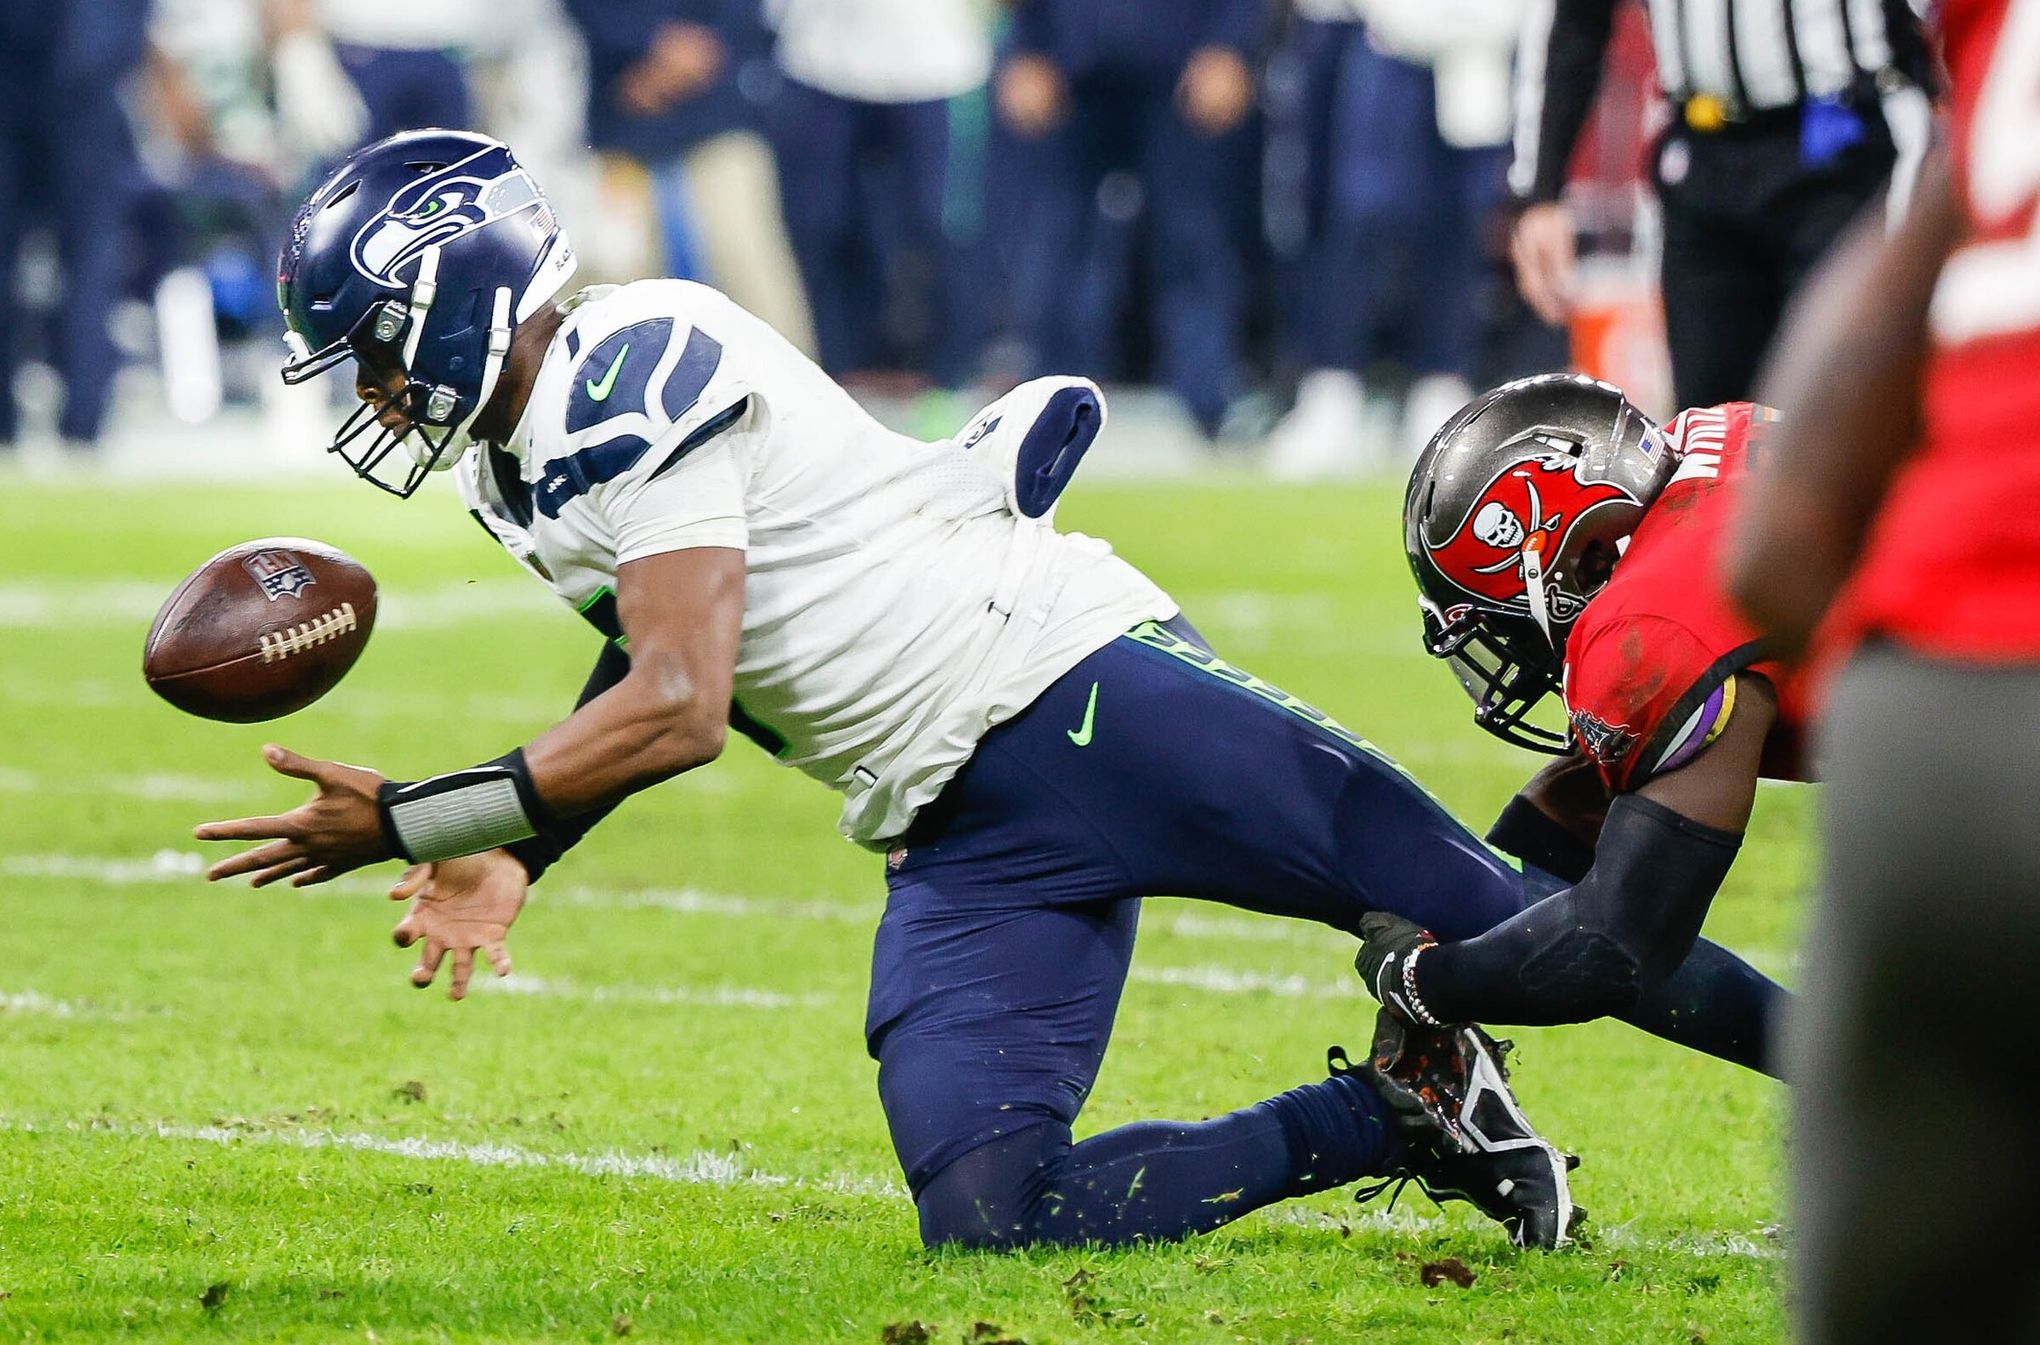 Seahawks vs. Buccaneers In Munich: How To Watch, Listen And Live Stream On  November 13